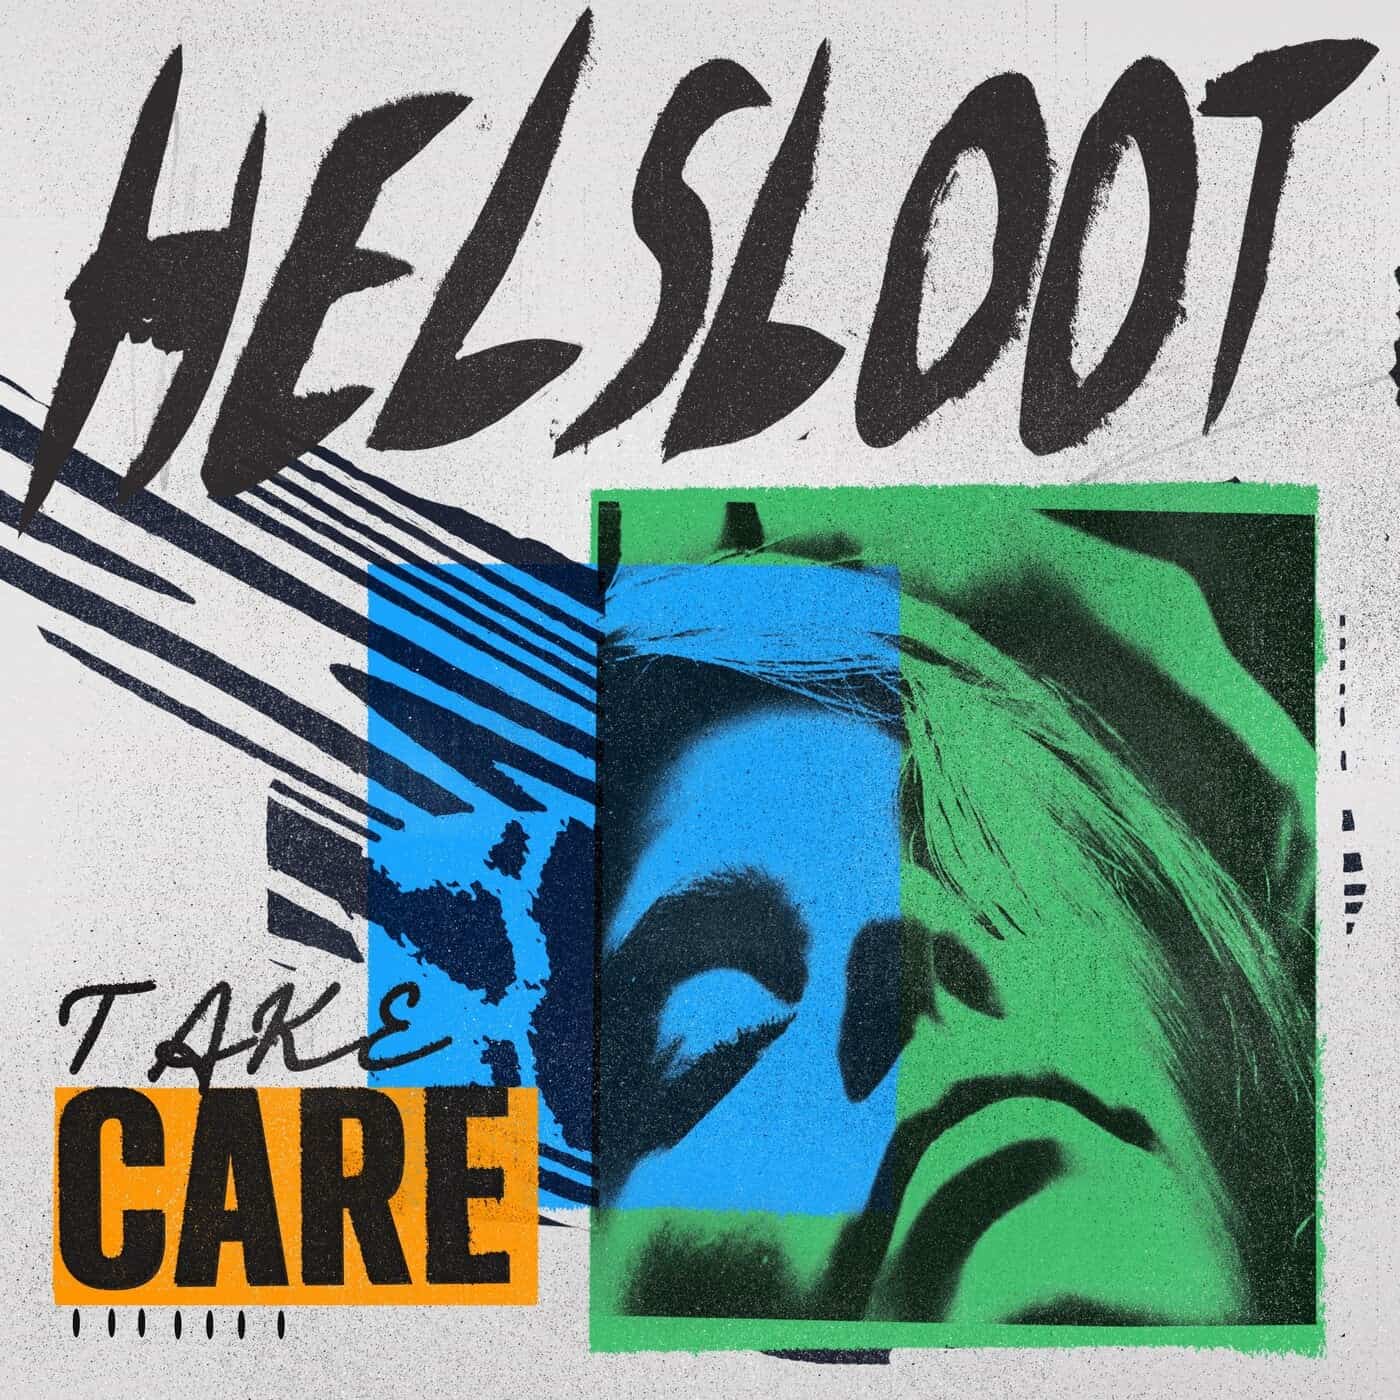 Download Helsloot - Take Care on Electrobuzz